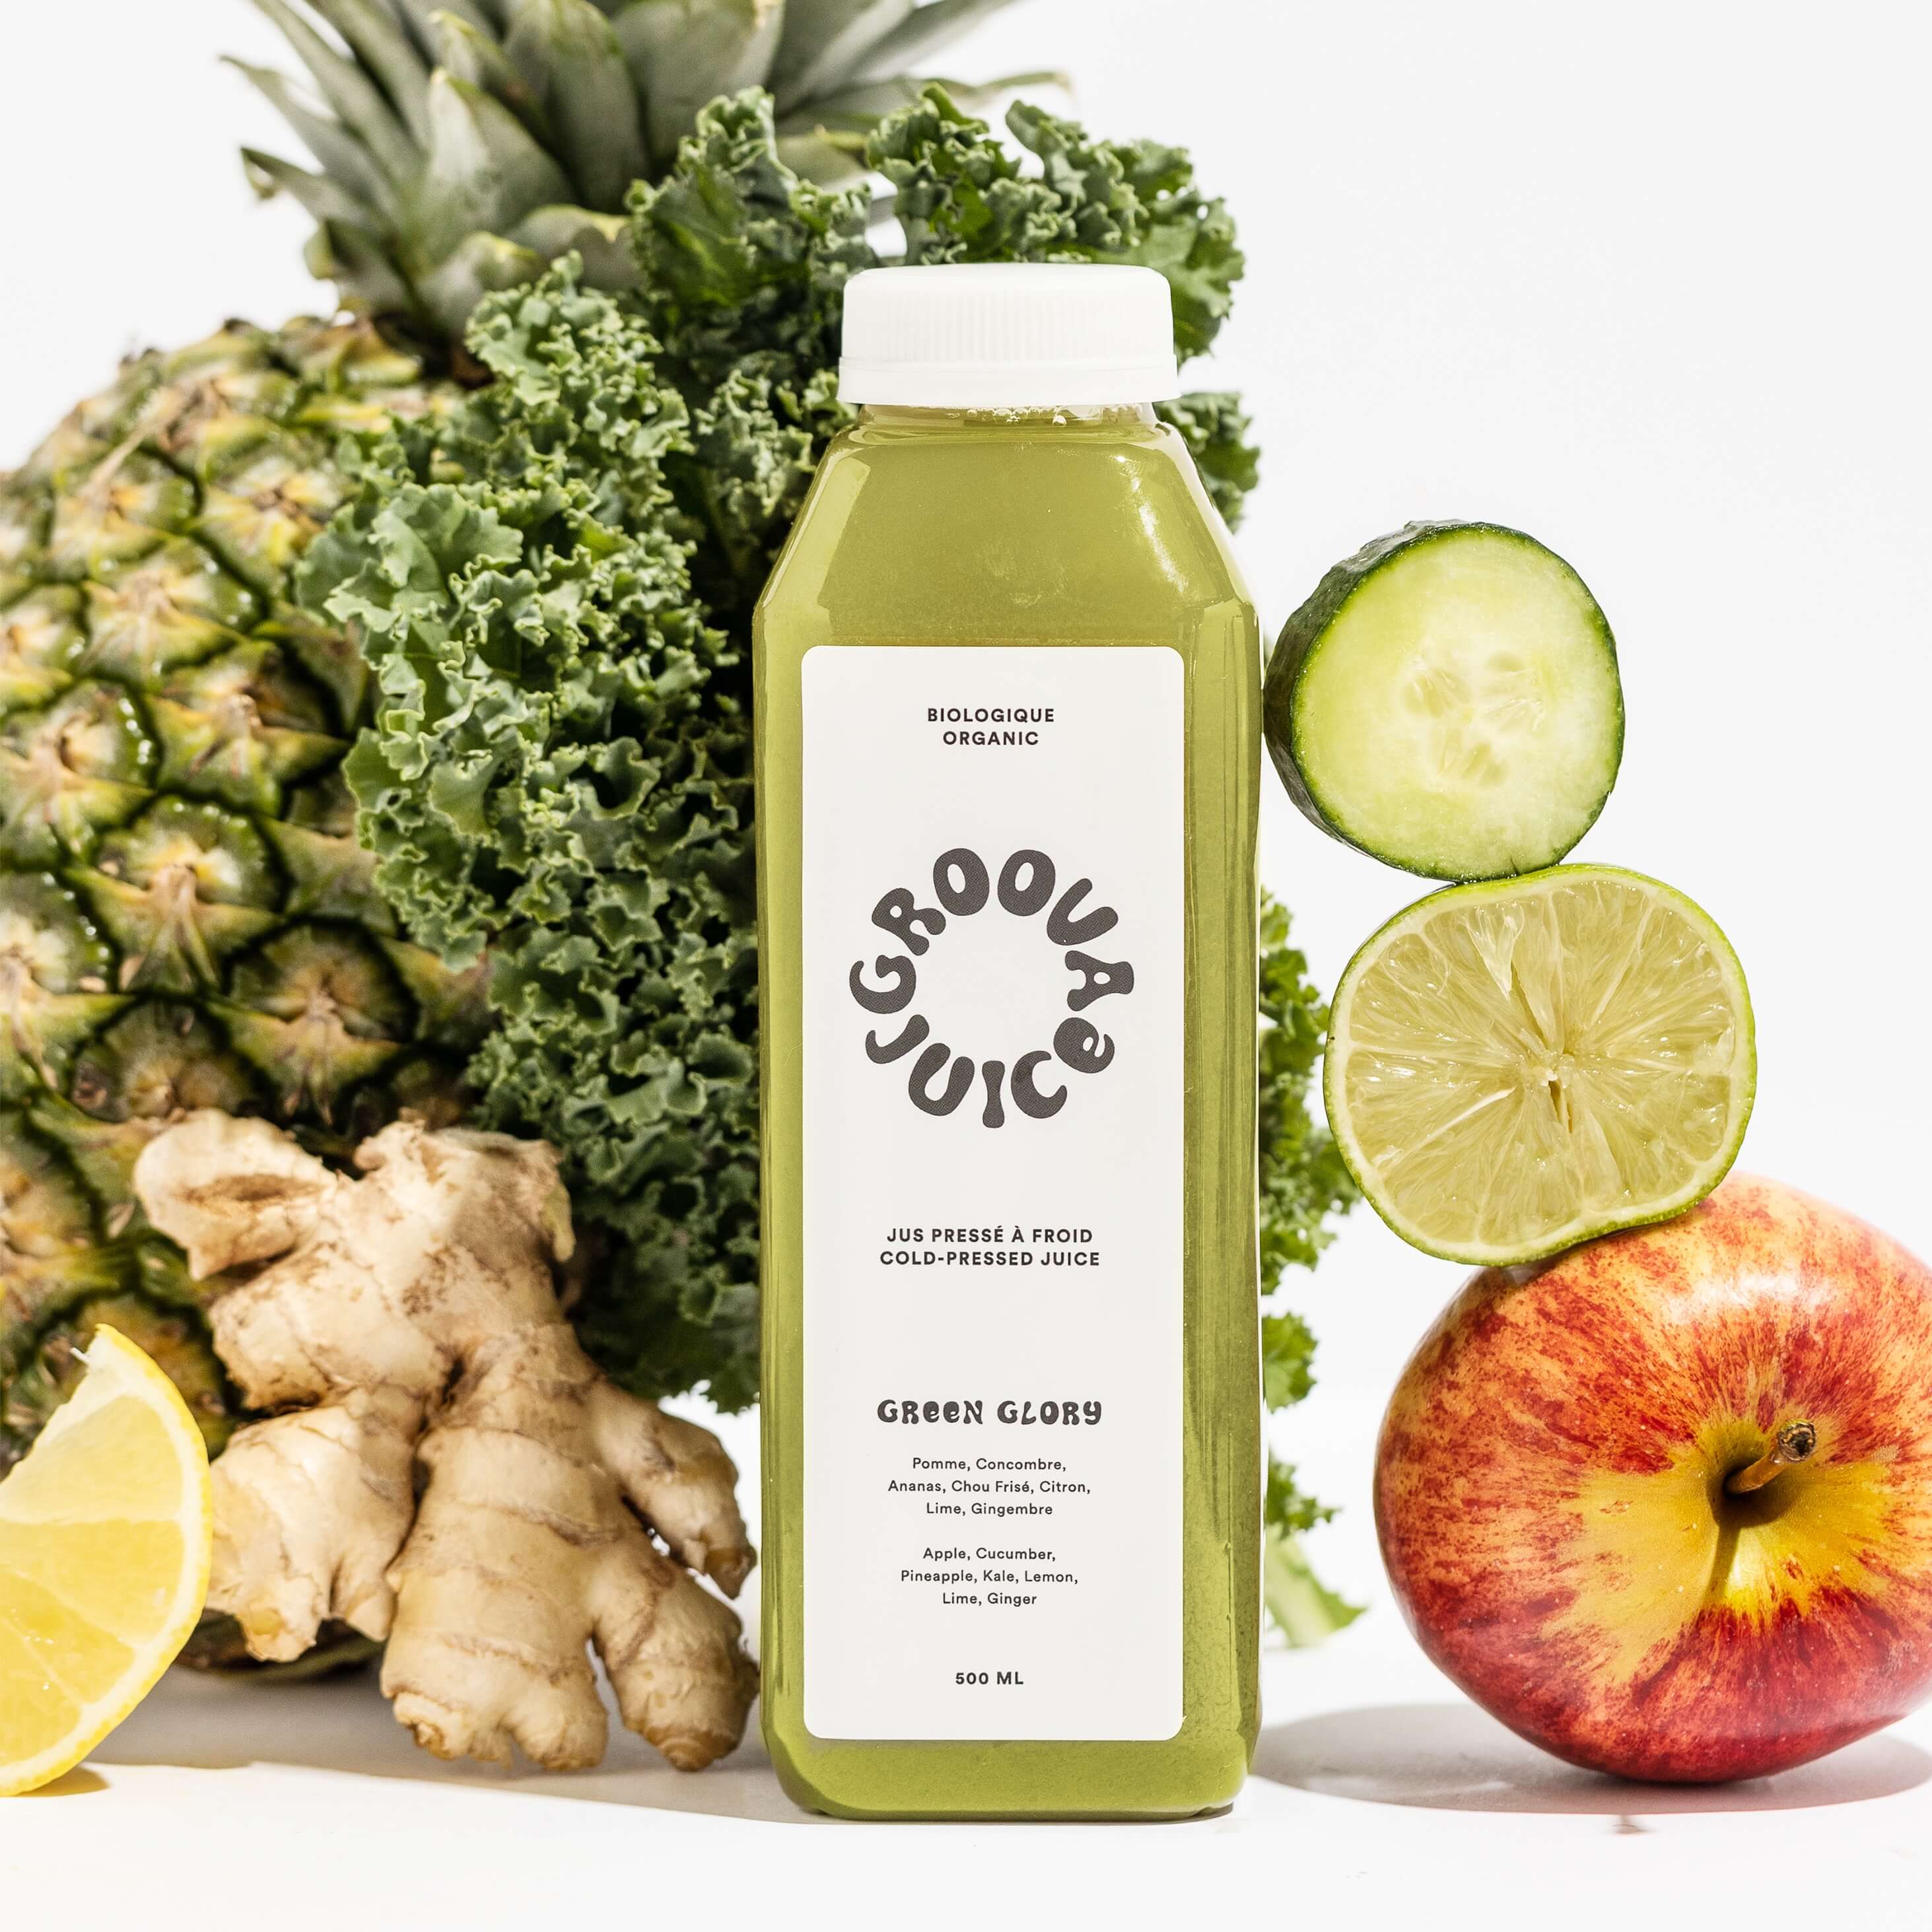 Green Glory Cold-Pressed Juice